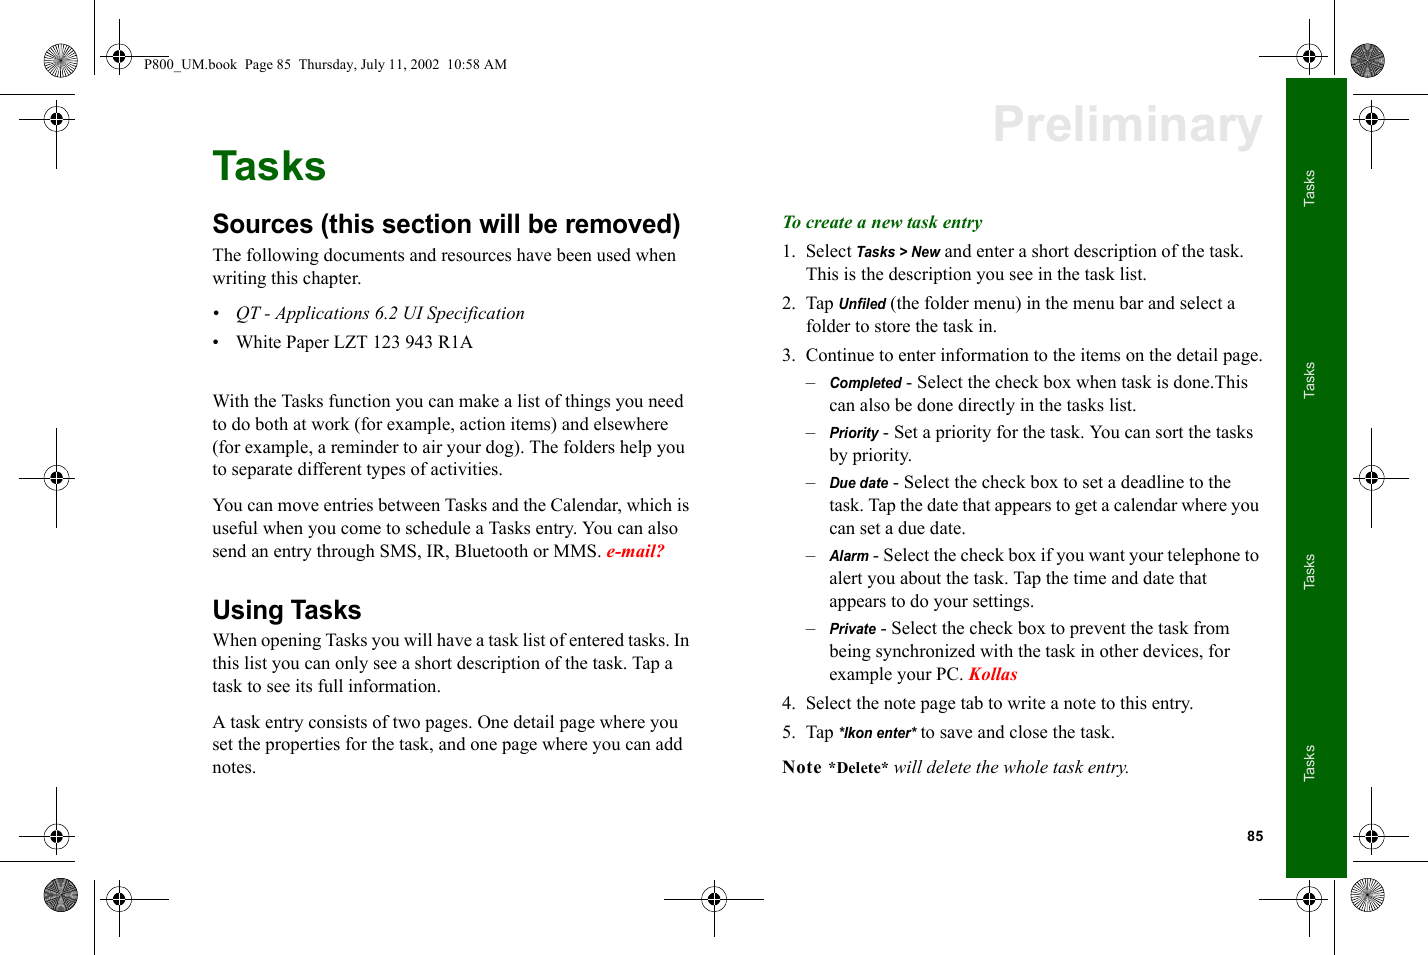 85TasksTasksTasksTasksPreliminaryTasksSources (this section will be removed)The following documents and resources have been used when writing this chapter.• QT - Applications 6.2 UI Specification• White Paper LZT 123 943 R1AWith the Tasks function you can make a list of things you need to do both at work (for example, action items) and elsewhere (for example, a reminder to air your dog). The folders help you to separate different types of activities.You can move entries between Tasks and the Calendar, which is useful when you come to schedule a Tasks entry. You can also send an entry through SMS, IR, Bluetooth or MMS. e-mail?Using TasksWhen opening Tasks you will have a task list of entered tasks. In this list you can only see a short description of the task. Tap a task to see its full information.A task entry consists of two pages. One detail page where you set the properties for the task, and one page where you can add notes. To create a new task entry1. Select Tasks &gt; New and enter a short description of the task.This is the description you see in the task list.2. Tap Unfiled (the folder menu) in the menu bar and select a folder to store the task in.3. Continue to enter information to the items on the detail page.–Completed - Select the check box when task is done.This can also be done directly in the tasks list.–Priority - Set a priority for the task. You can sort the tasks by priority.–Due date - Select the check box to set a deadline to the task. Tap the date that appears to get a calendar where you can set a due date.–Alarm - Select the check box if you want your telephone to alert you about the task. Tap the time and date that appears to do your settings.–Private - Select the check box to prevent the task from being synchronized with the task in other devices, for example your PC. Kollas4. Select the note page tab to write a note to this entry.5. Tap *Ikon enter* to save and close the task.Note *Delete* will delete the whole task entry.P800_UM.book  Page 85  Thursday, July 11, 2002  10:58 AM